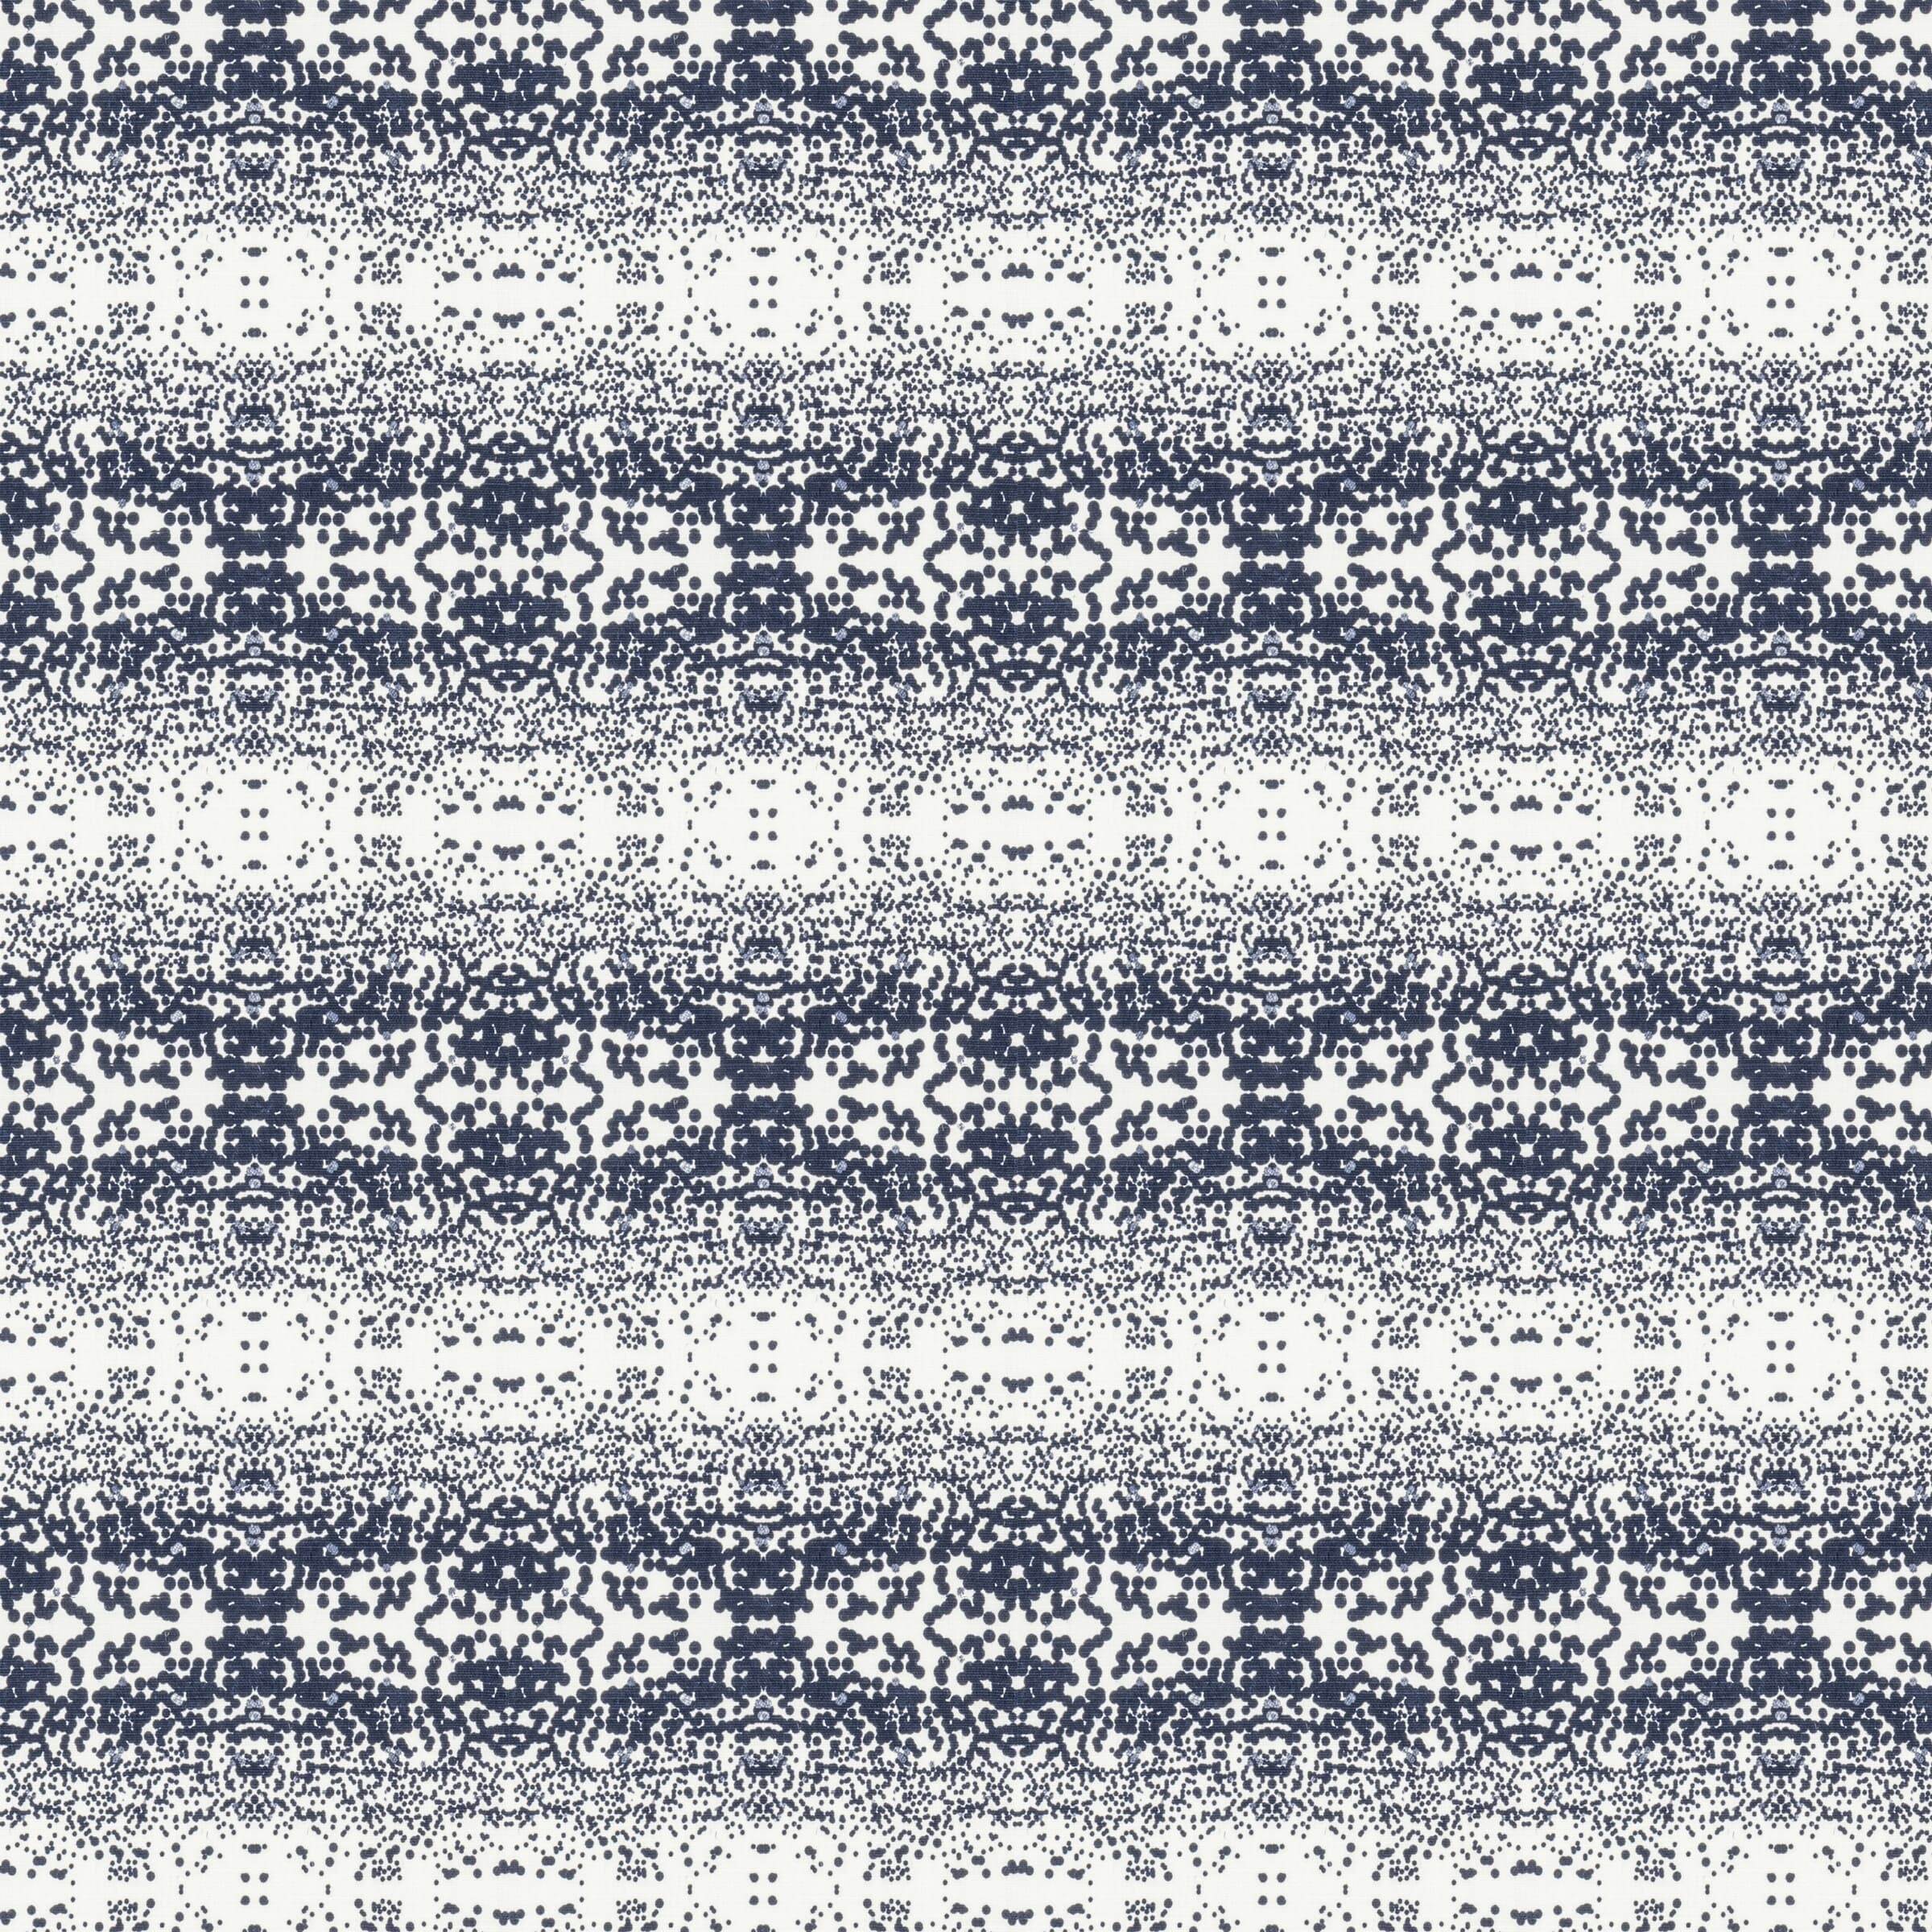 7824-1 Stardust Navy by Stout Fabric